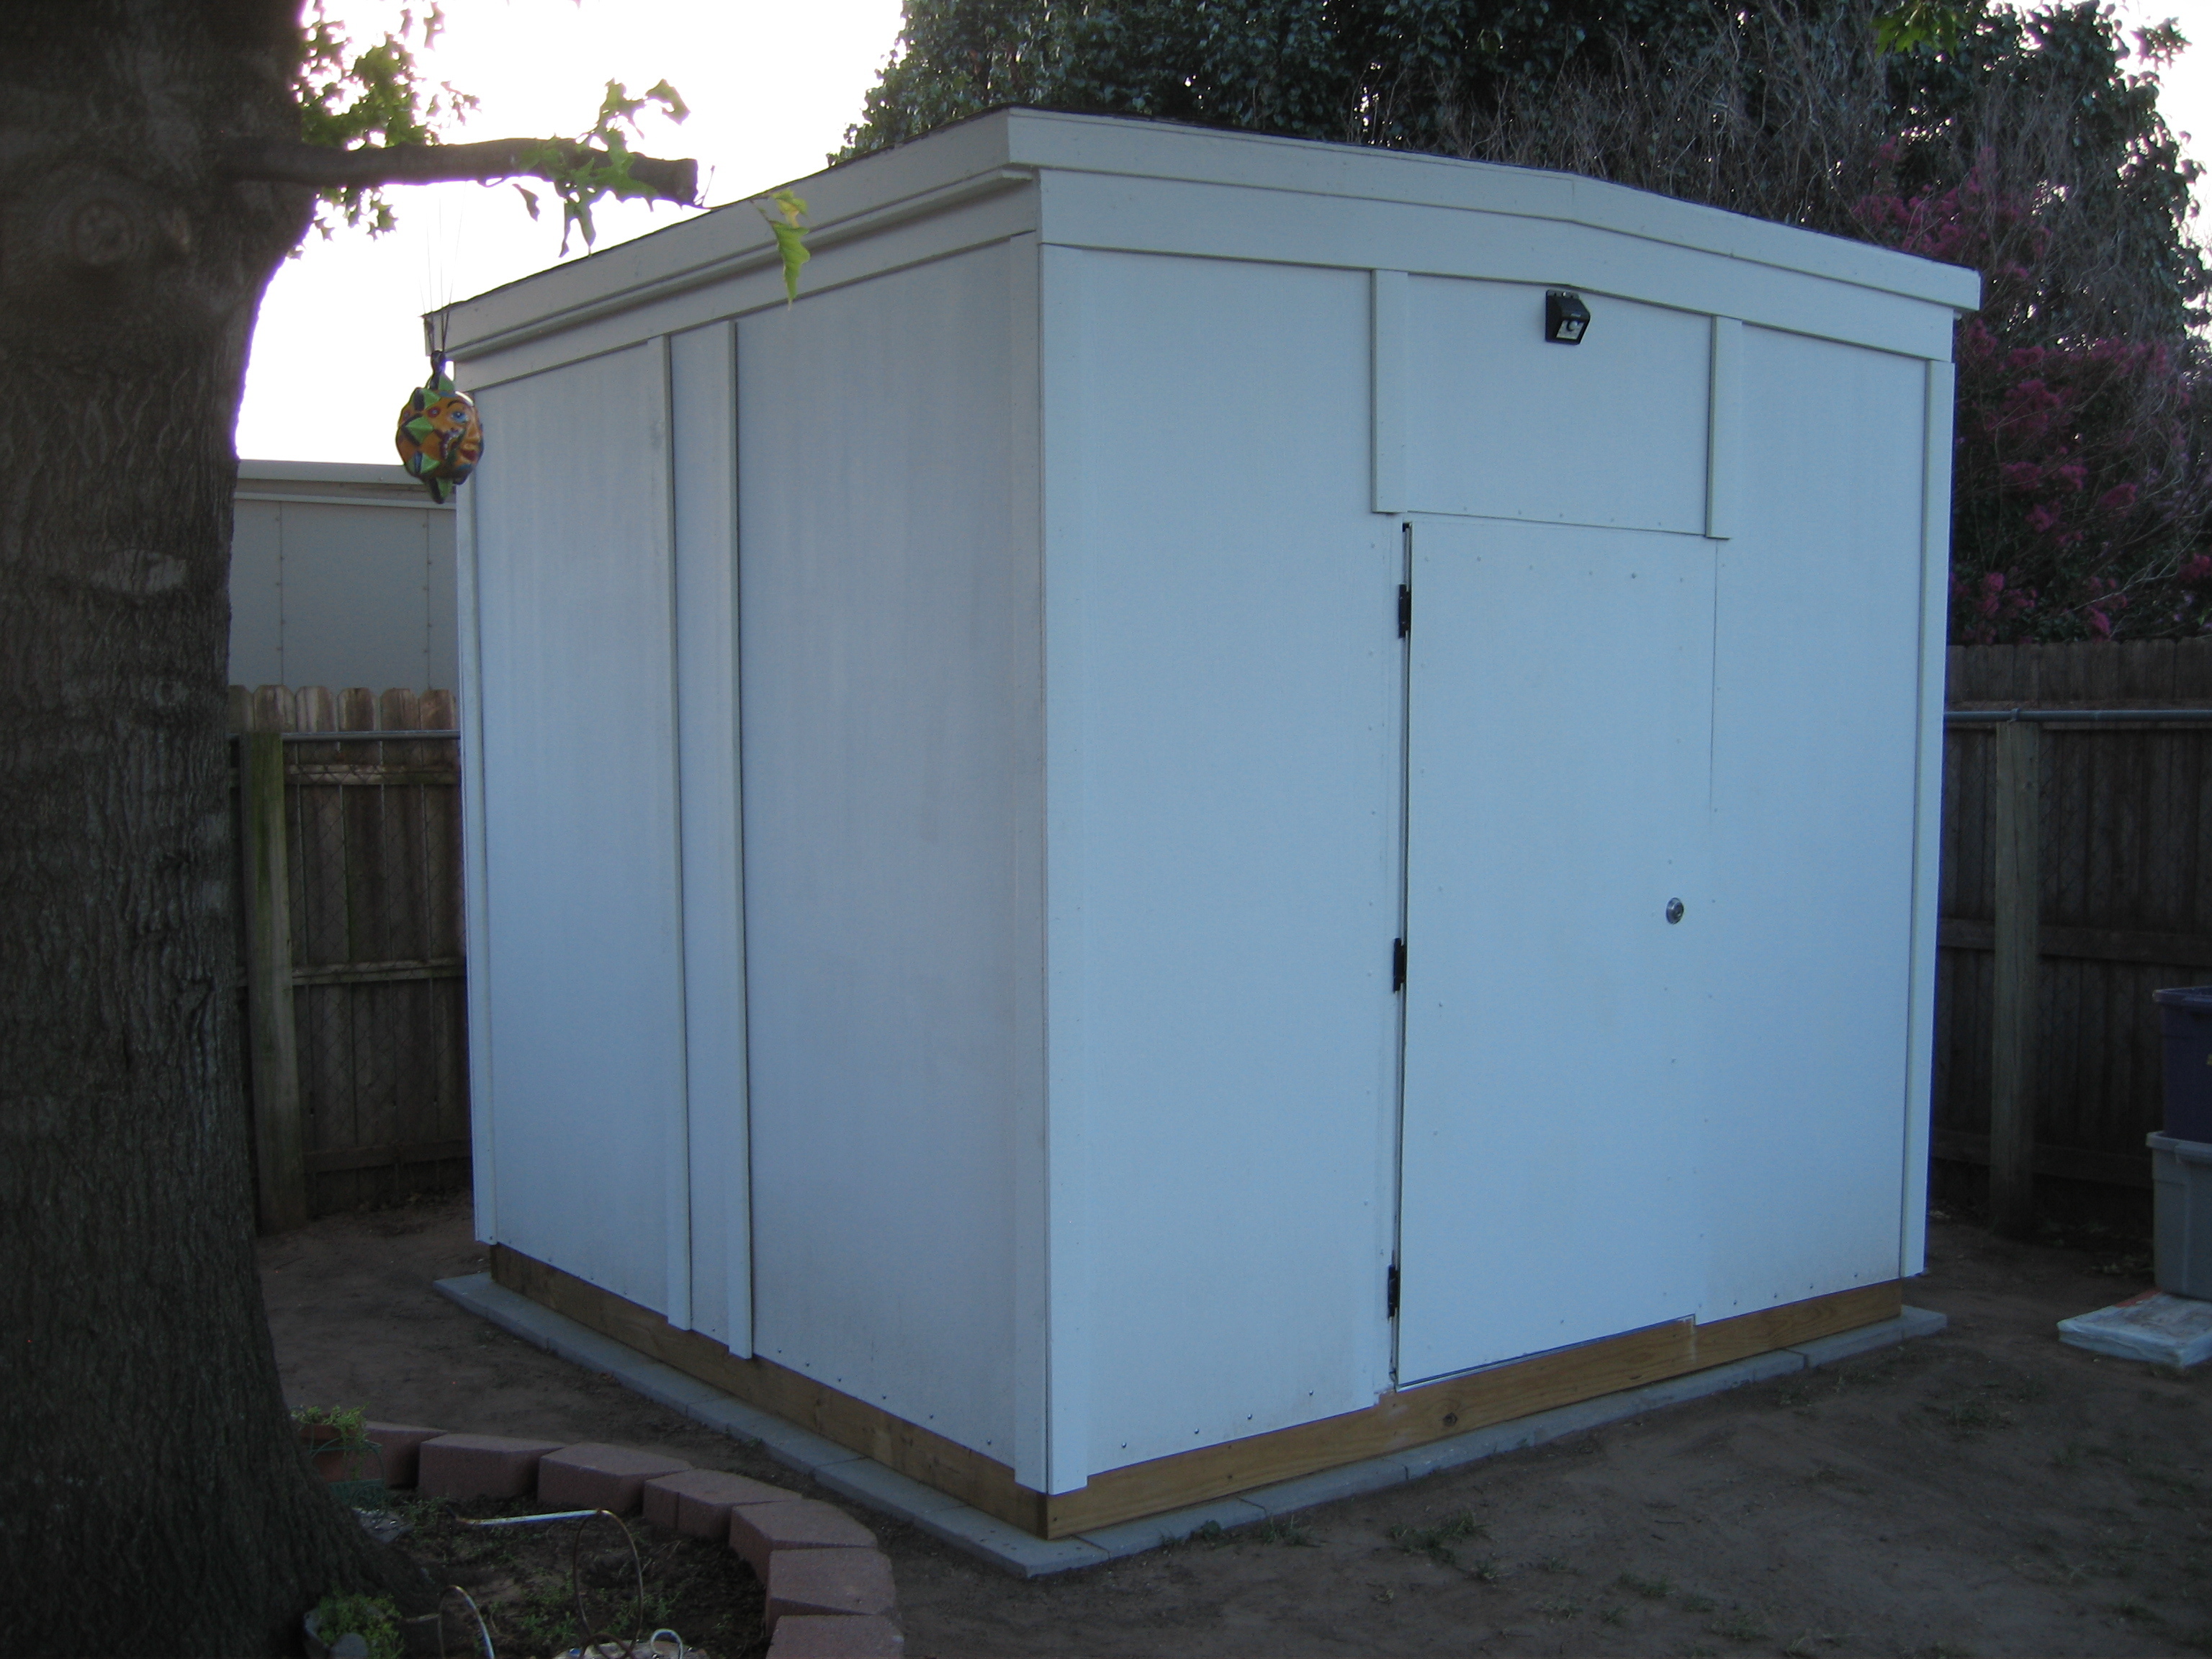 backyard shed 9x9 foot by 8 foot tall - ryobi nation projects